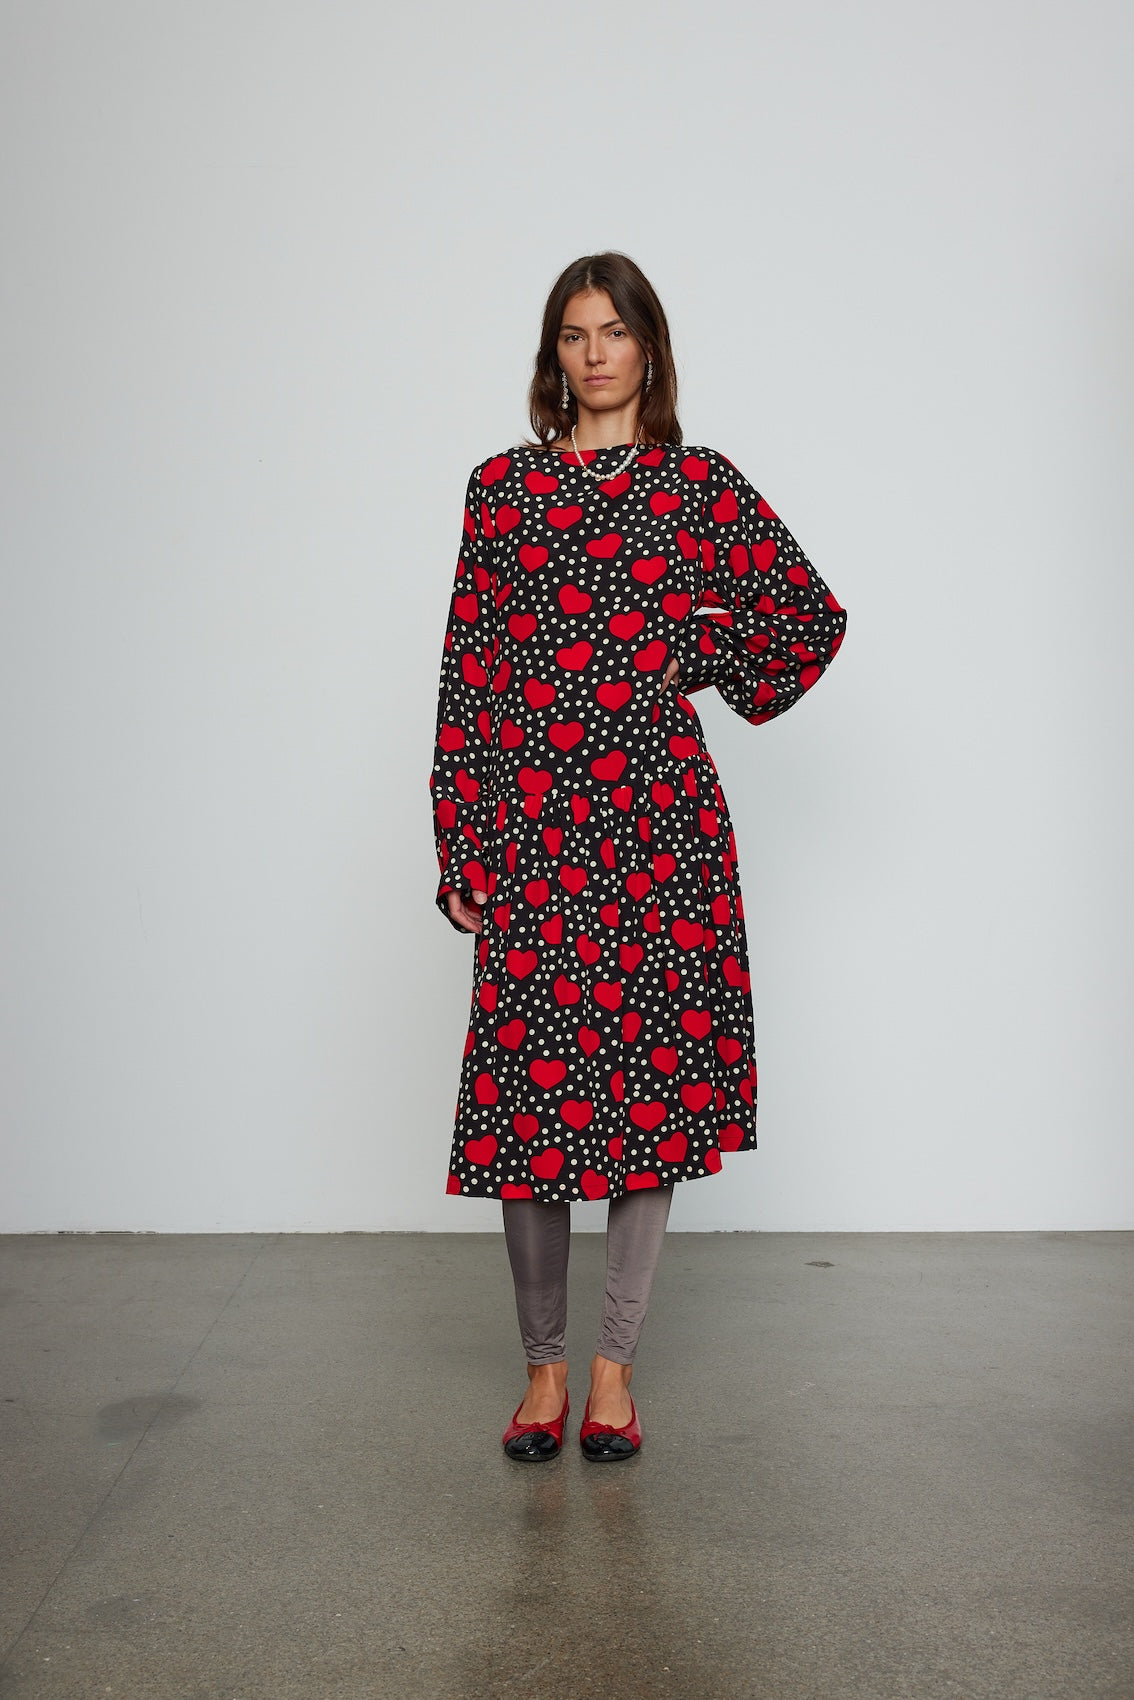 Caro Editions Holly Dress is an oversized style with a high neckline, low back with a large bow detail, and our long draped signature sleeves. The dress is made from soft silk crepe de chine featuring a heart print. Style it with an open shirt or denim jacket.